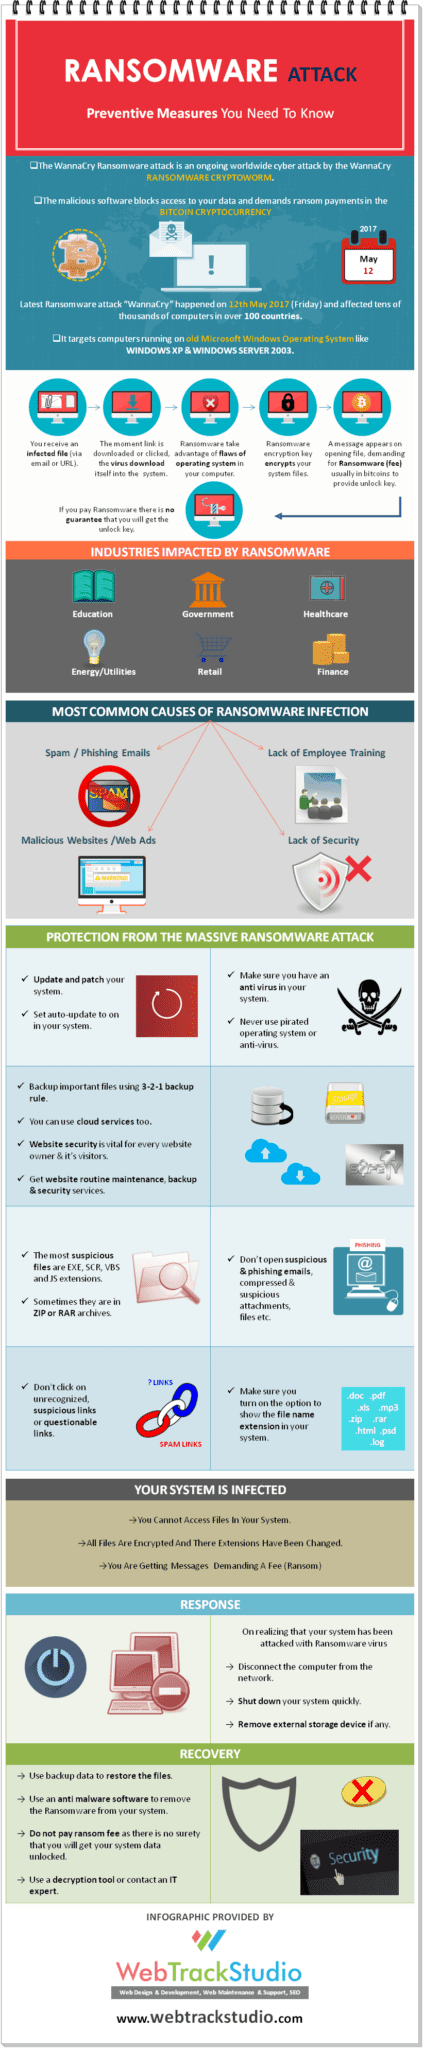 Ransomware Attack Prevention Tips Infographic WTS June 2017